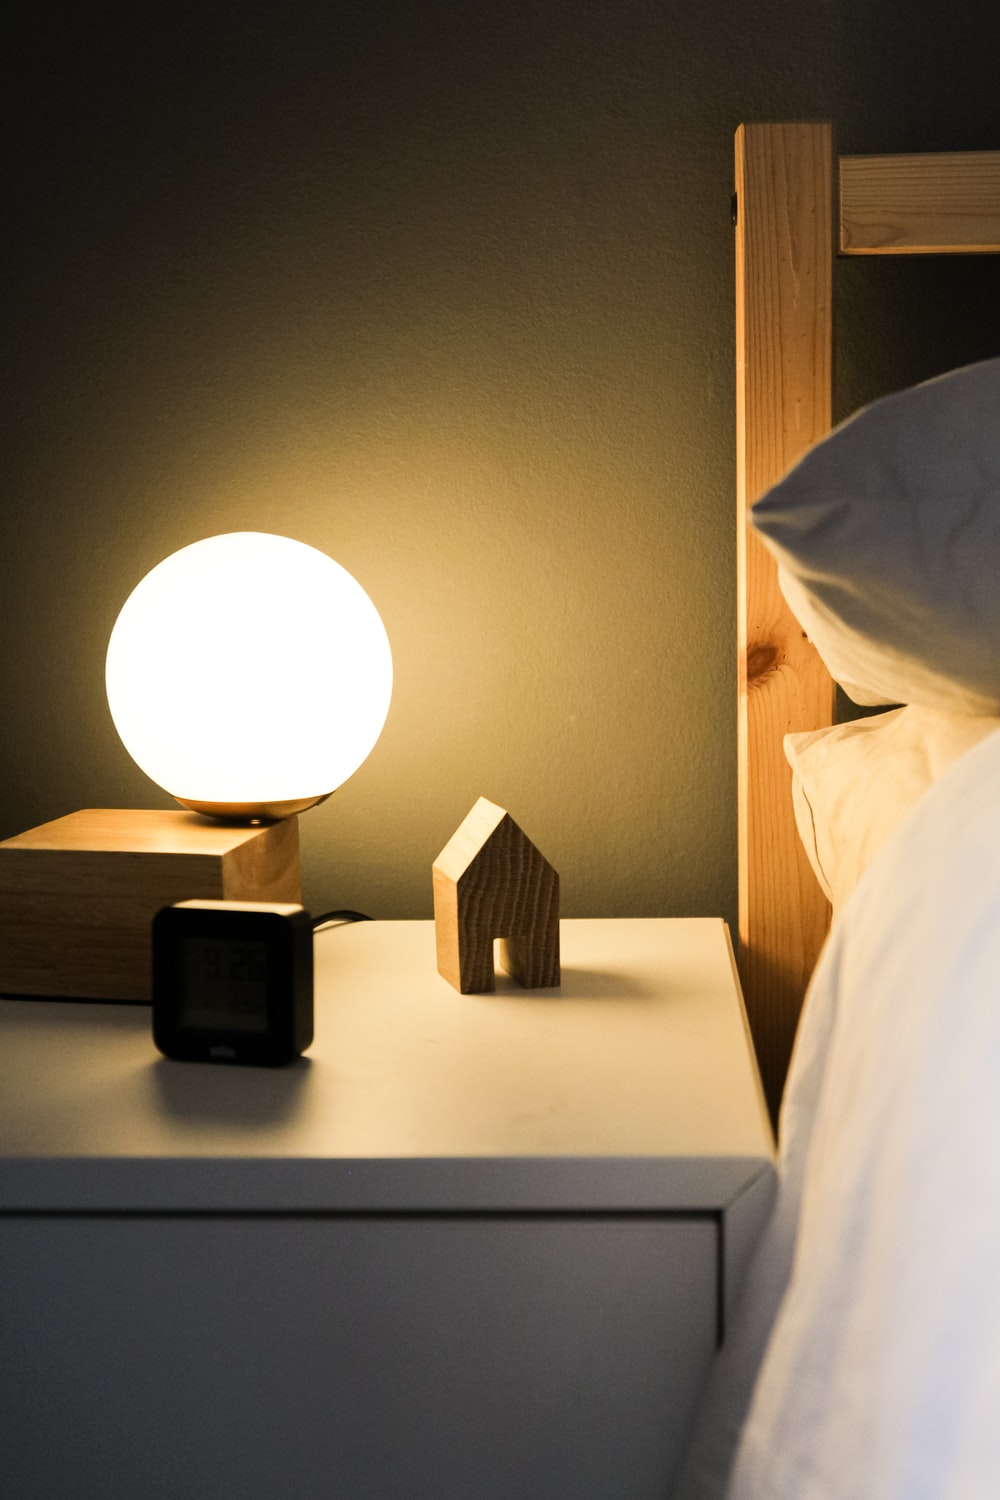 Night Lamp Picture. Download Free Image